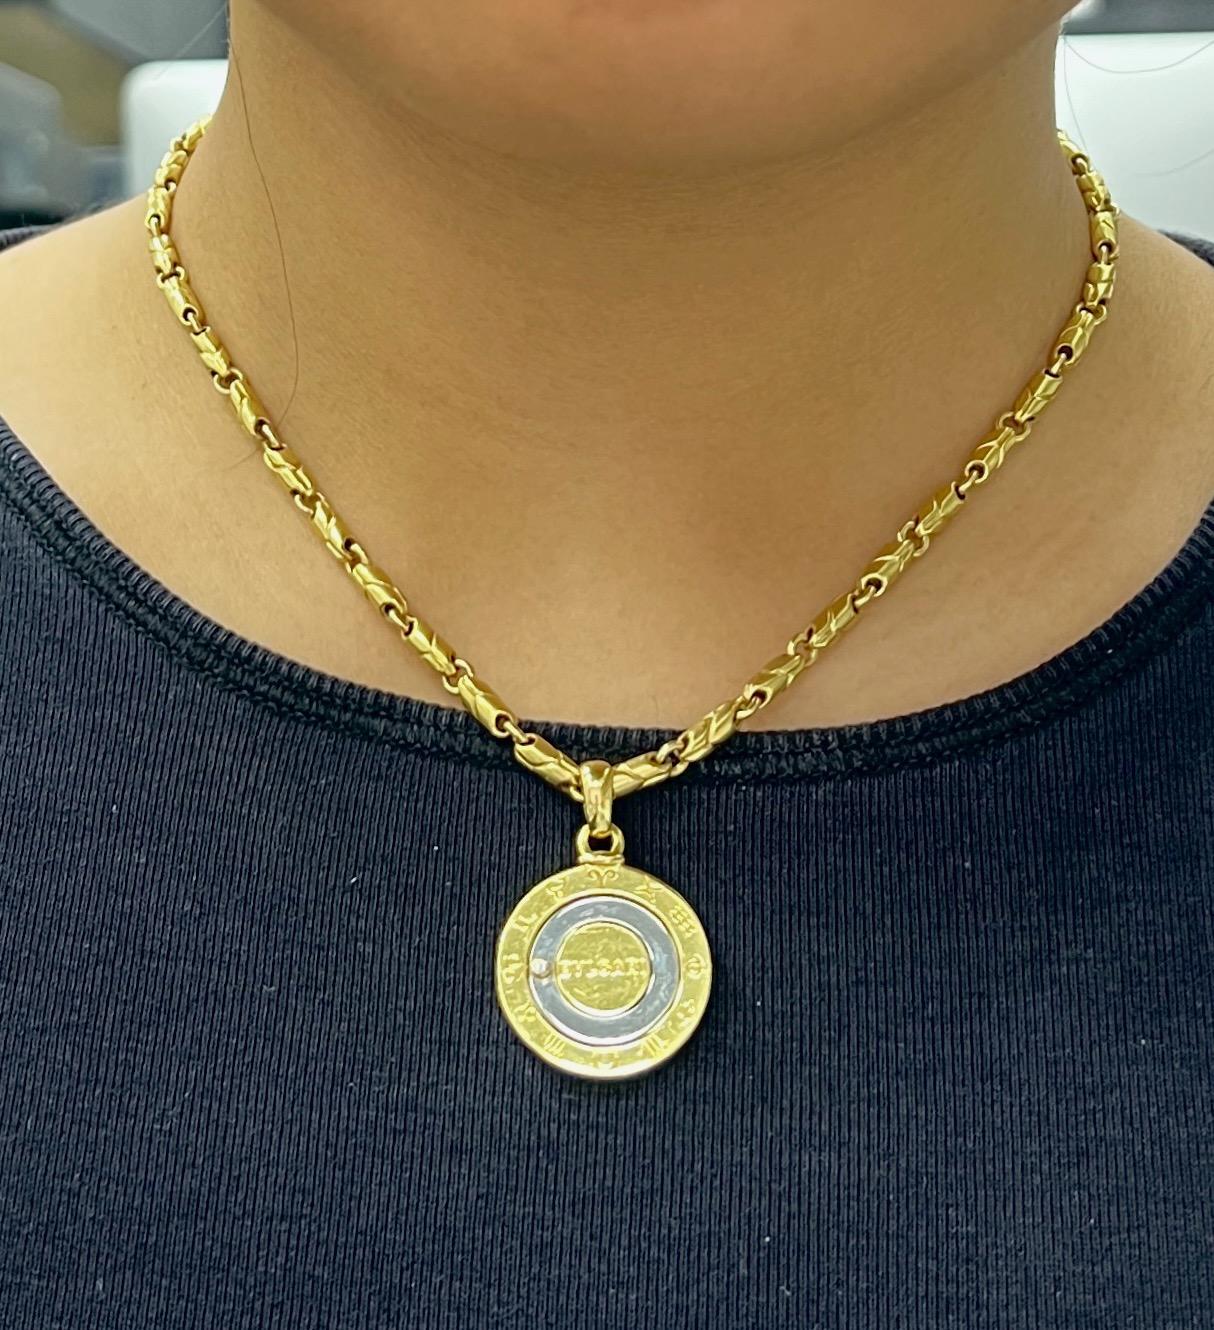 Bvlgari Zodiac Pendant Gold Necklace In Excellent Condition For Sale In New York, NY